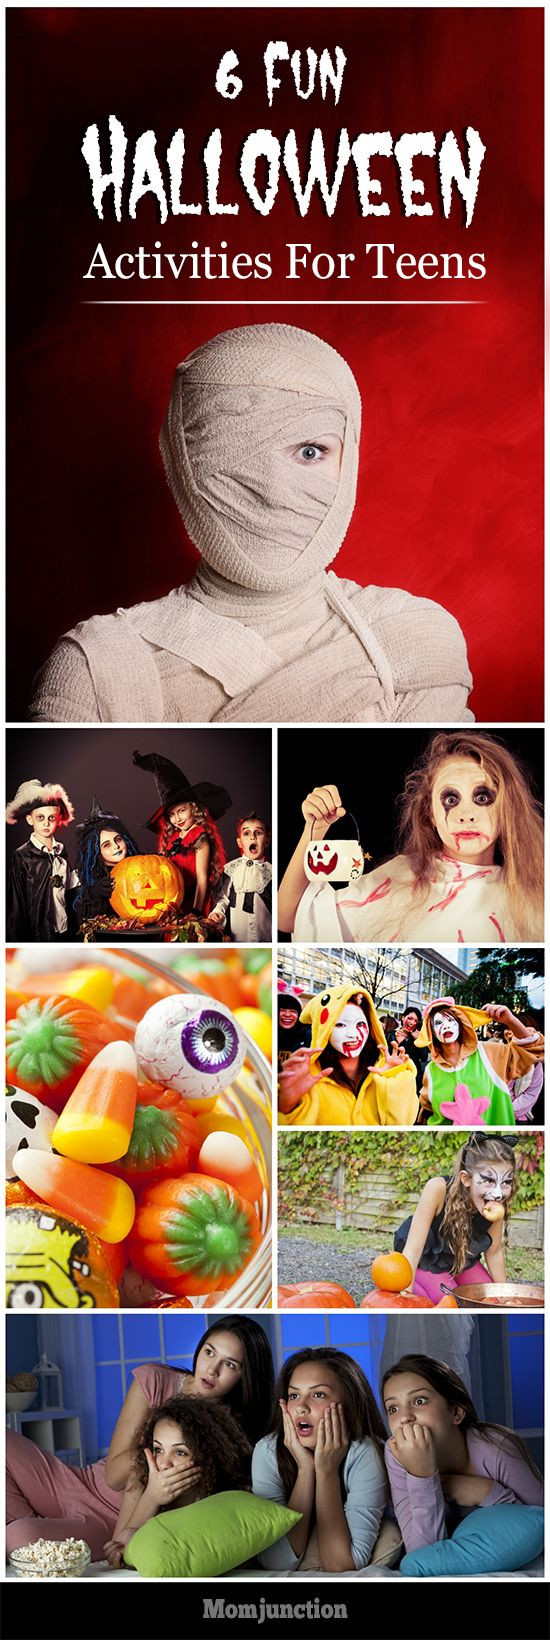 Halloween Party Game Ideas For Teenagers
 307 best images about Teen Topics on Pinterest